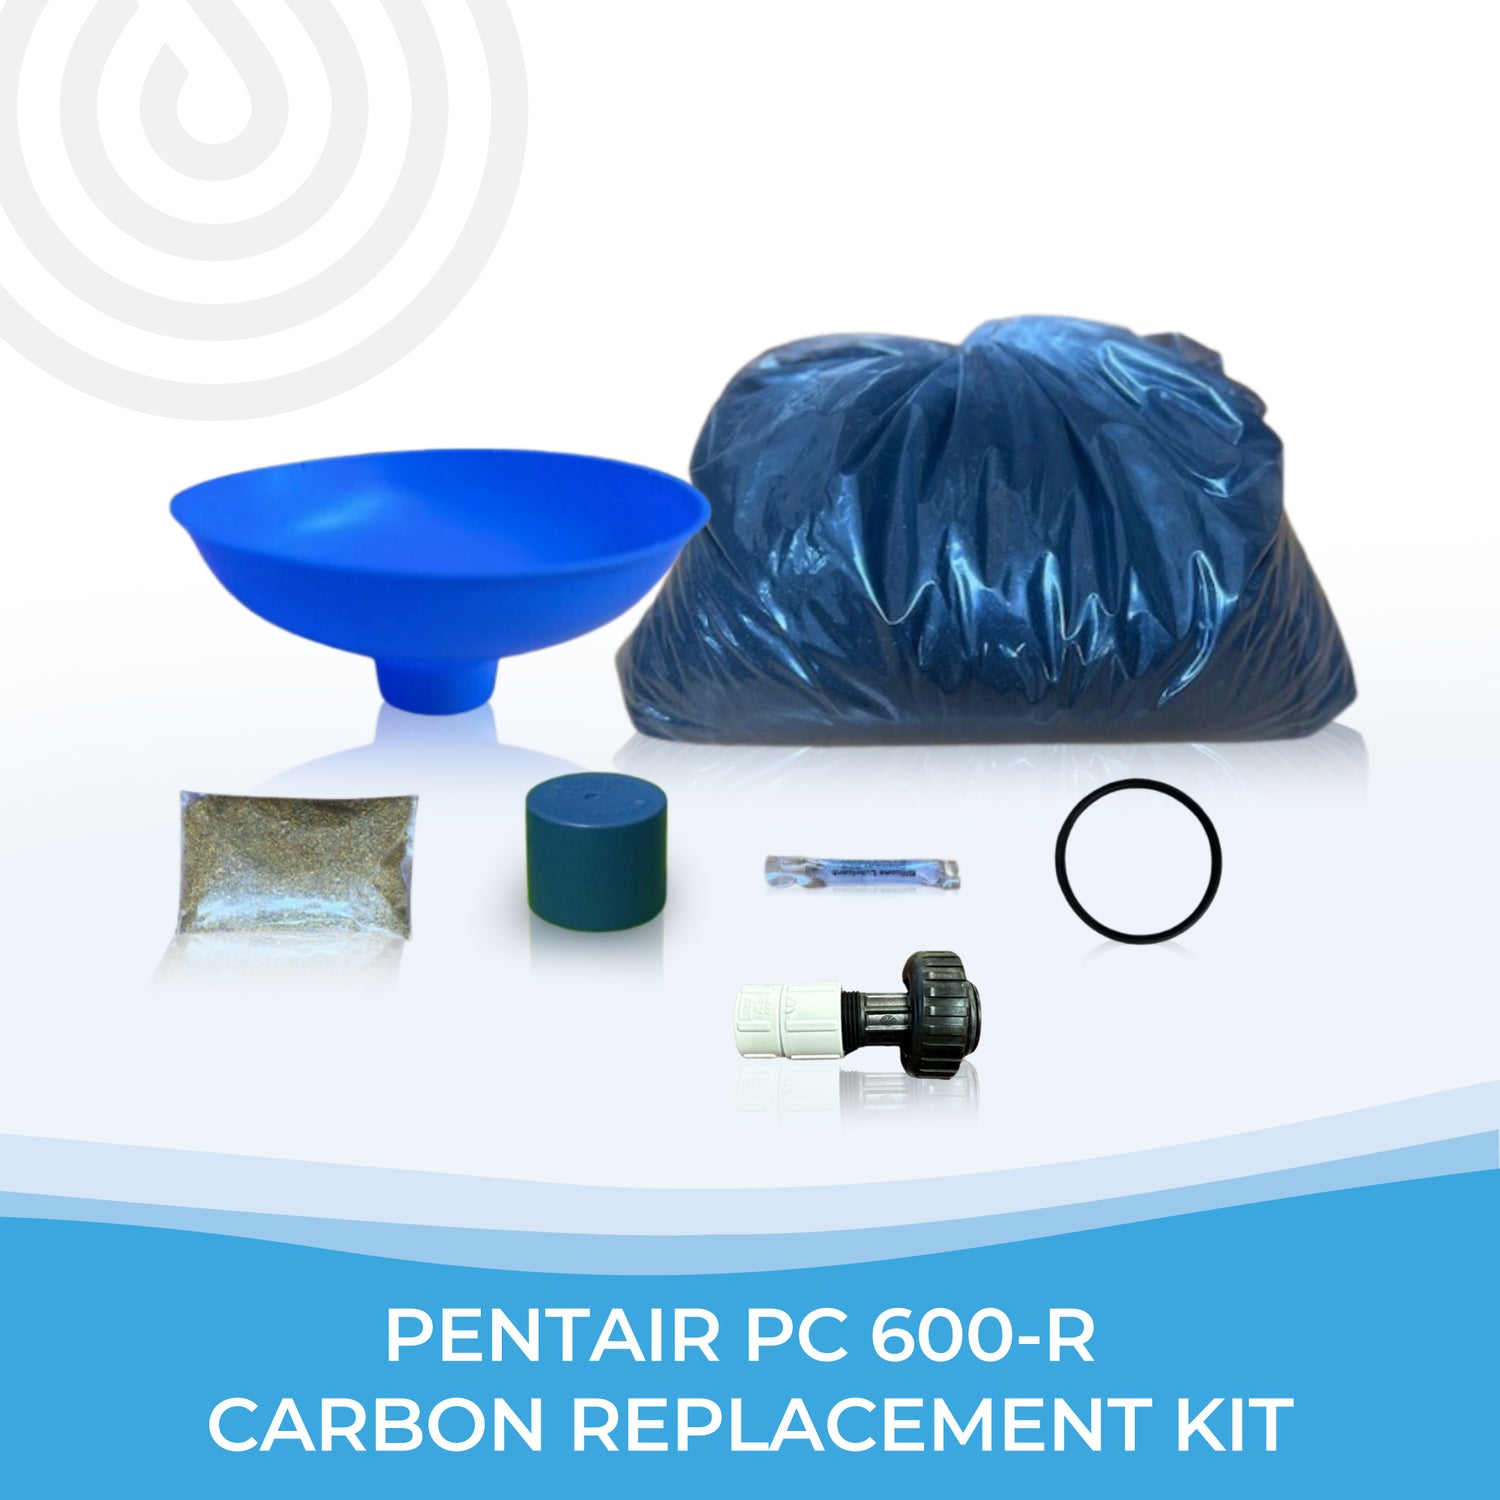 Carbon Replacement Kits